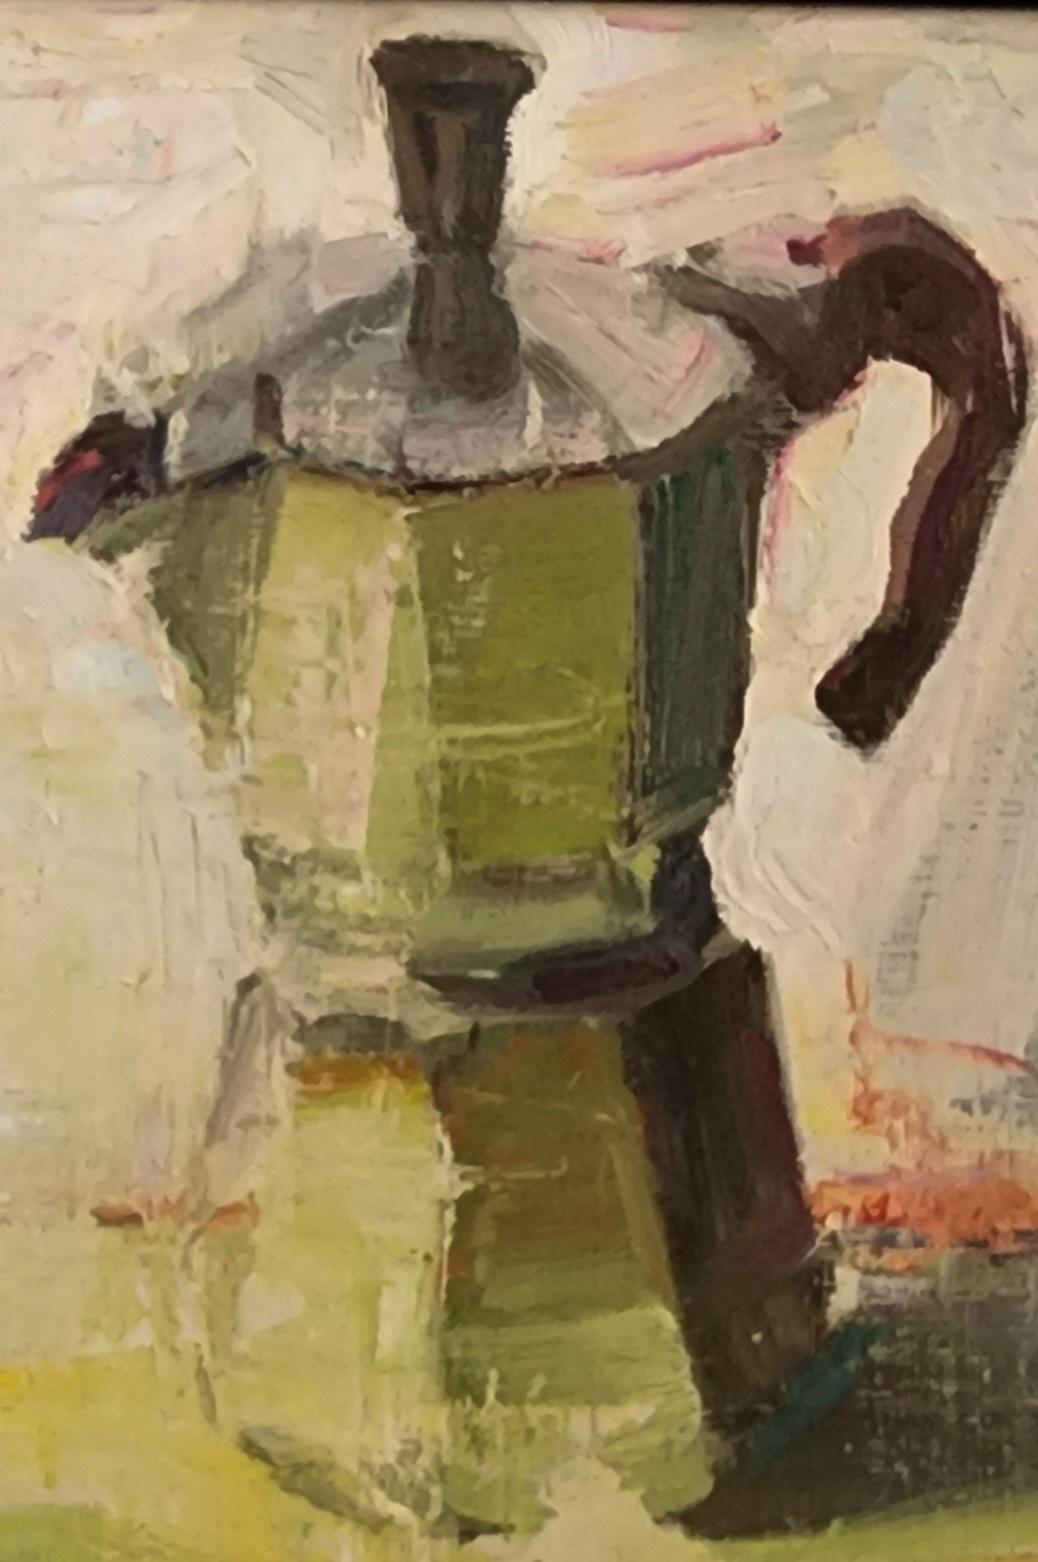 Moka Espresso is an example of the bright colors that Beckner uses in his paintings. 
Jim Beckner’s art vibrates with the pulse of the city. His edgy and energetic paintings give one a sense of motion, and though his subject is gritty, the colors